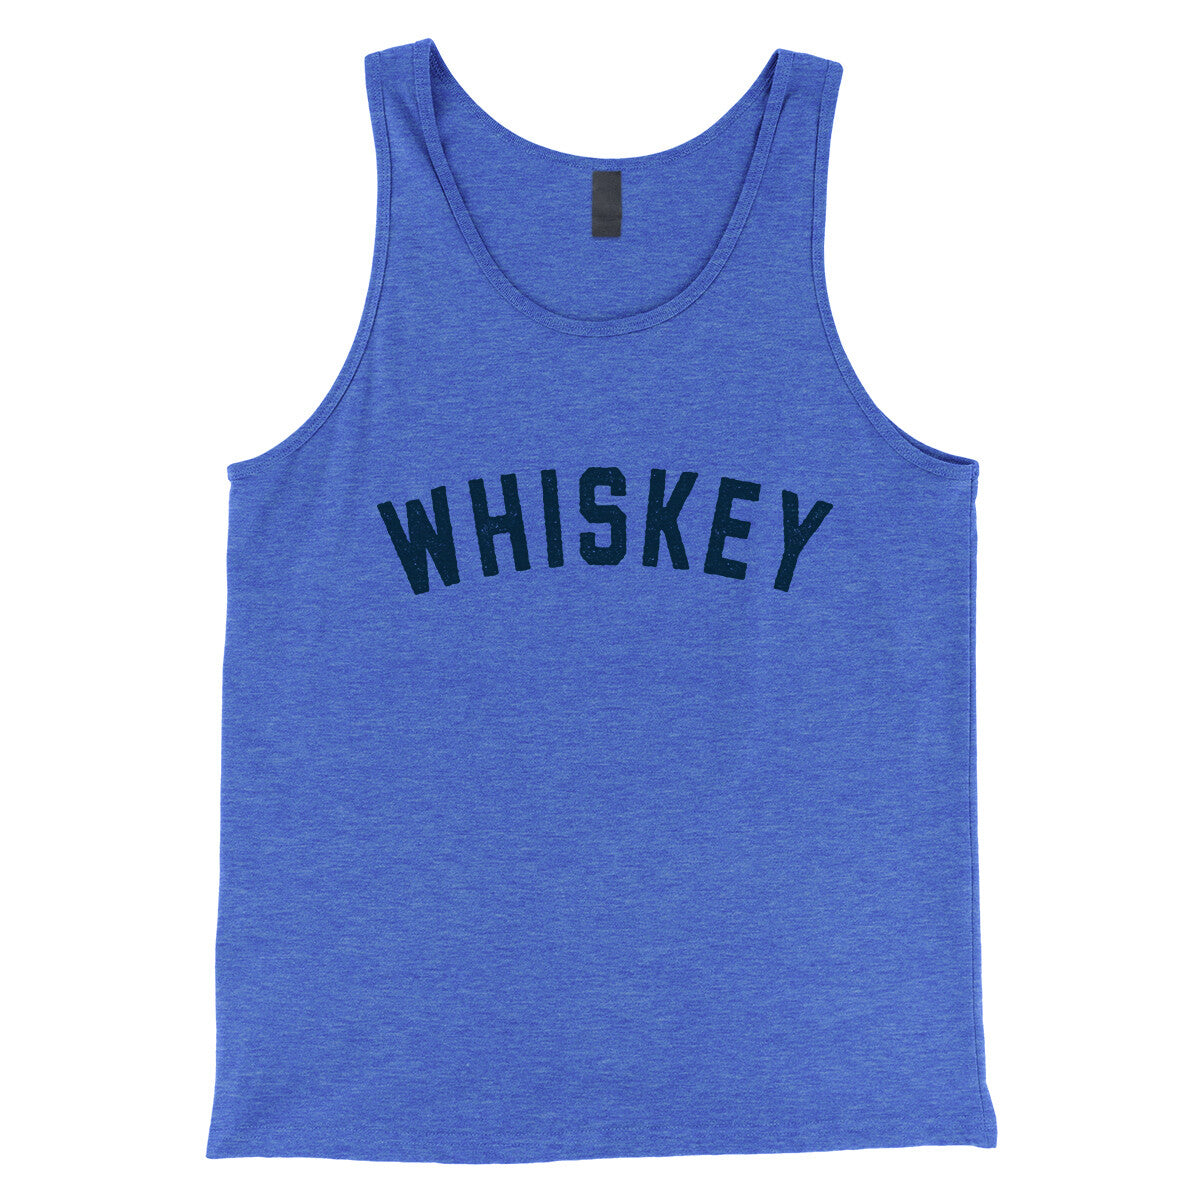 Whiskey in True Royal TriBlend Color